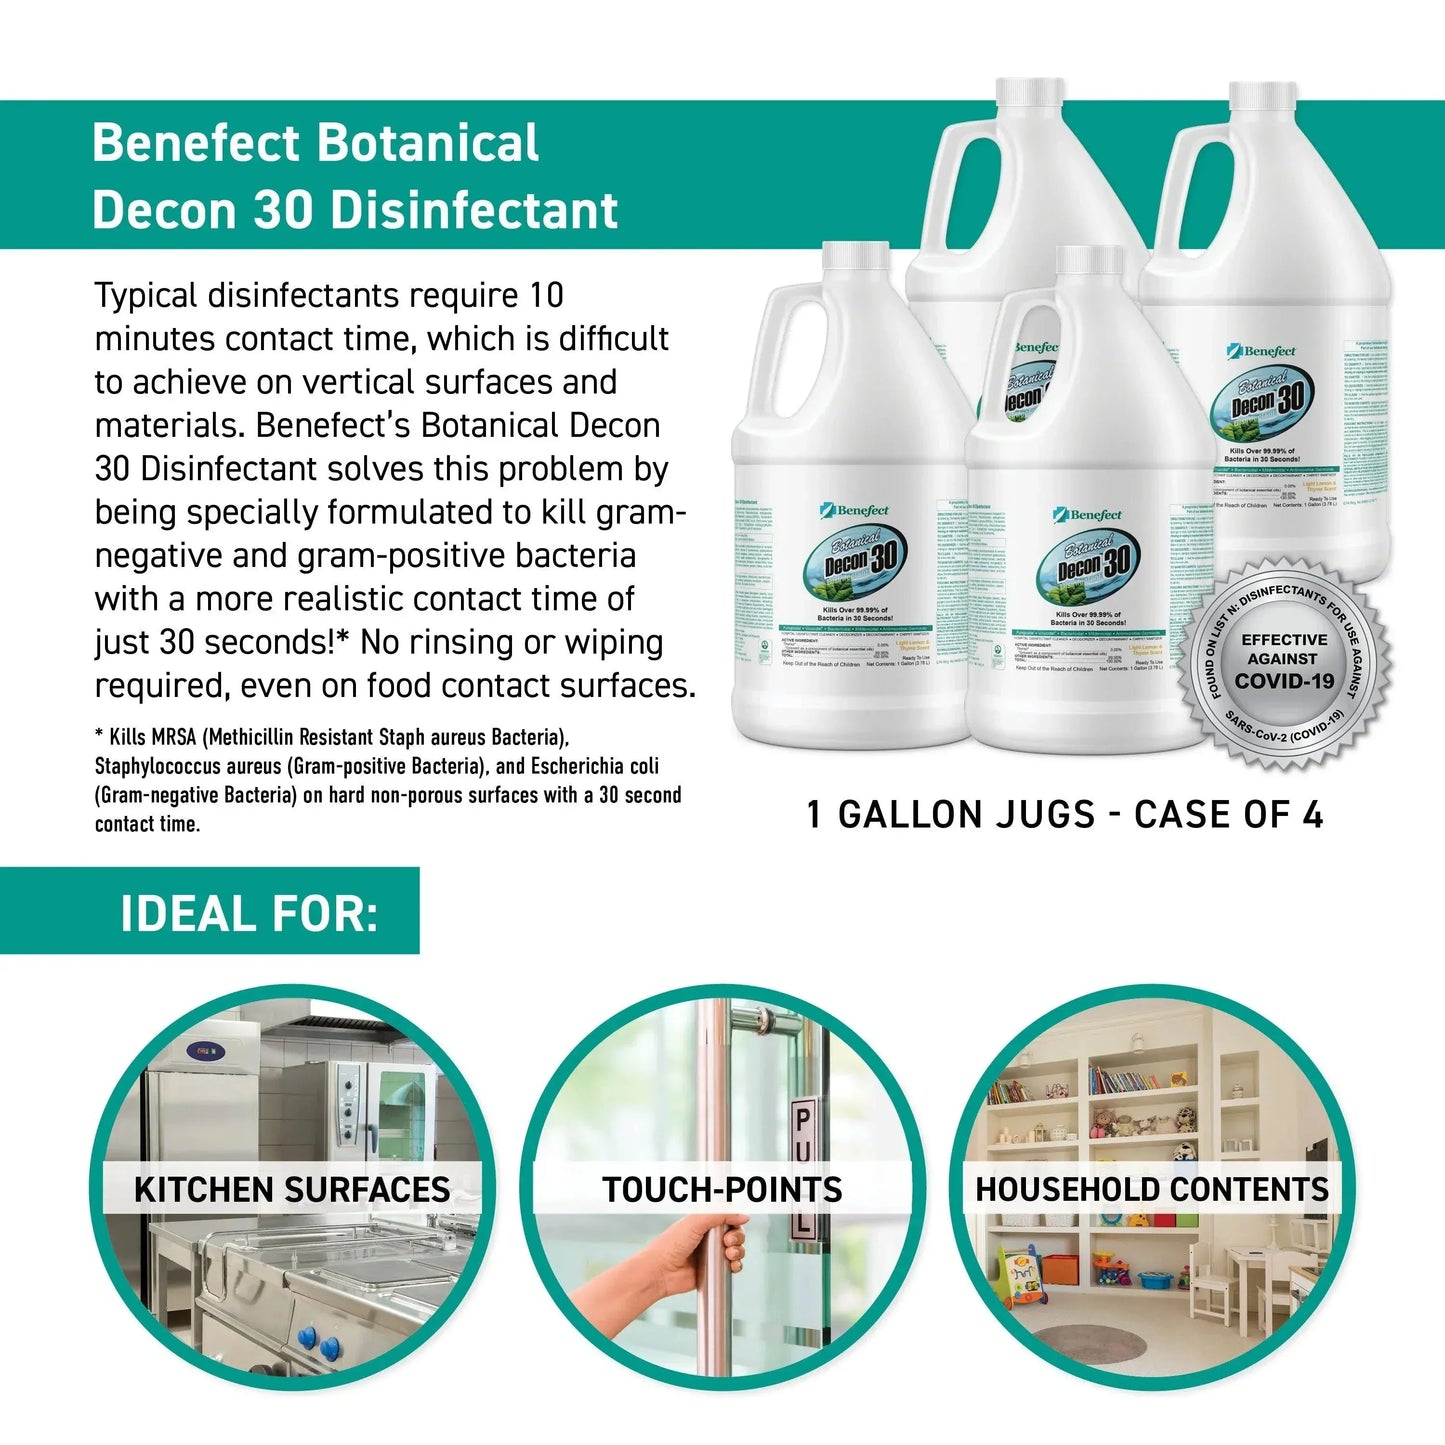 Benefect Botanical Decon 30, Disinfectant Cleaner (55 gal) Misc